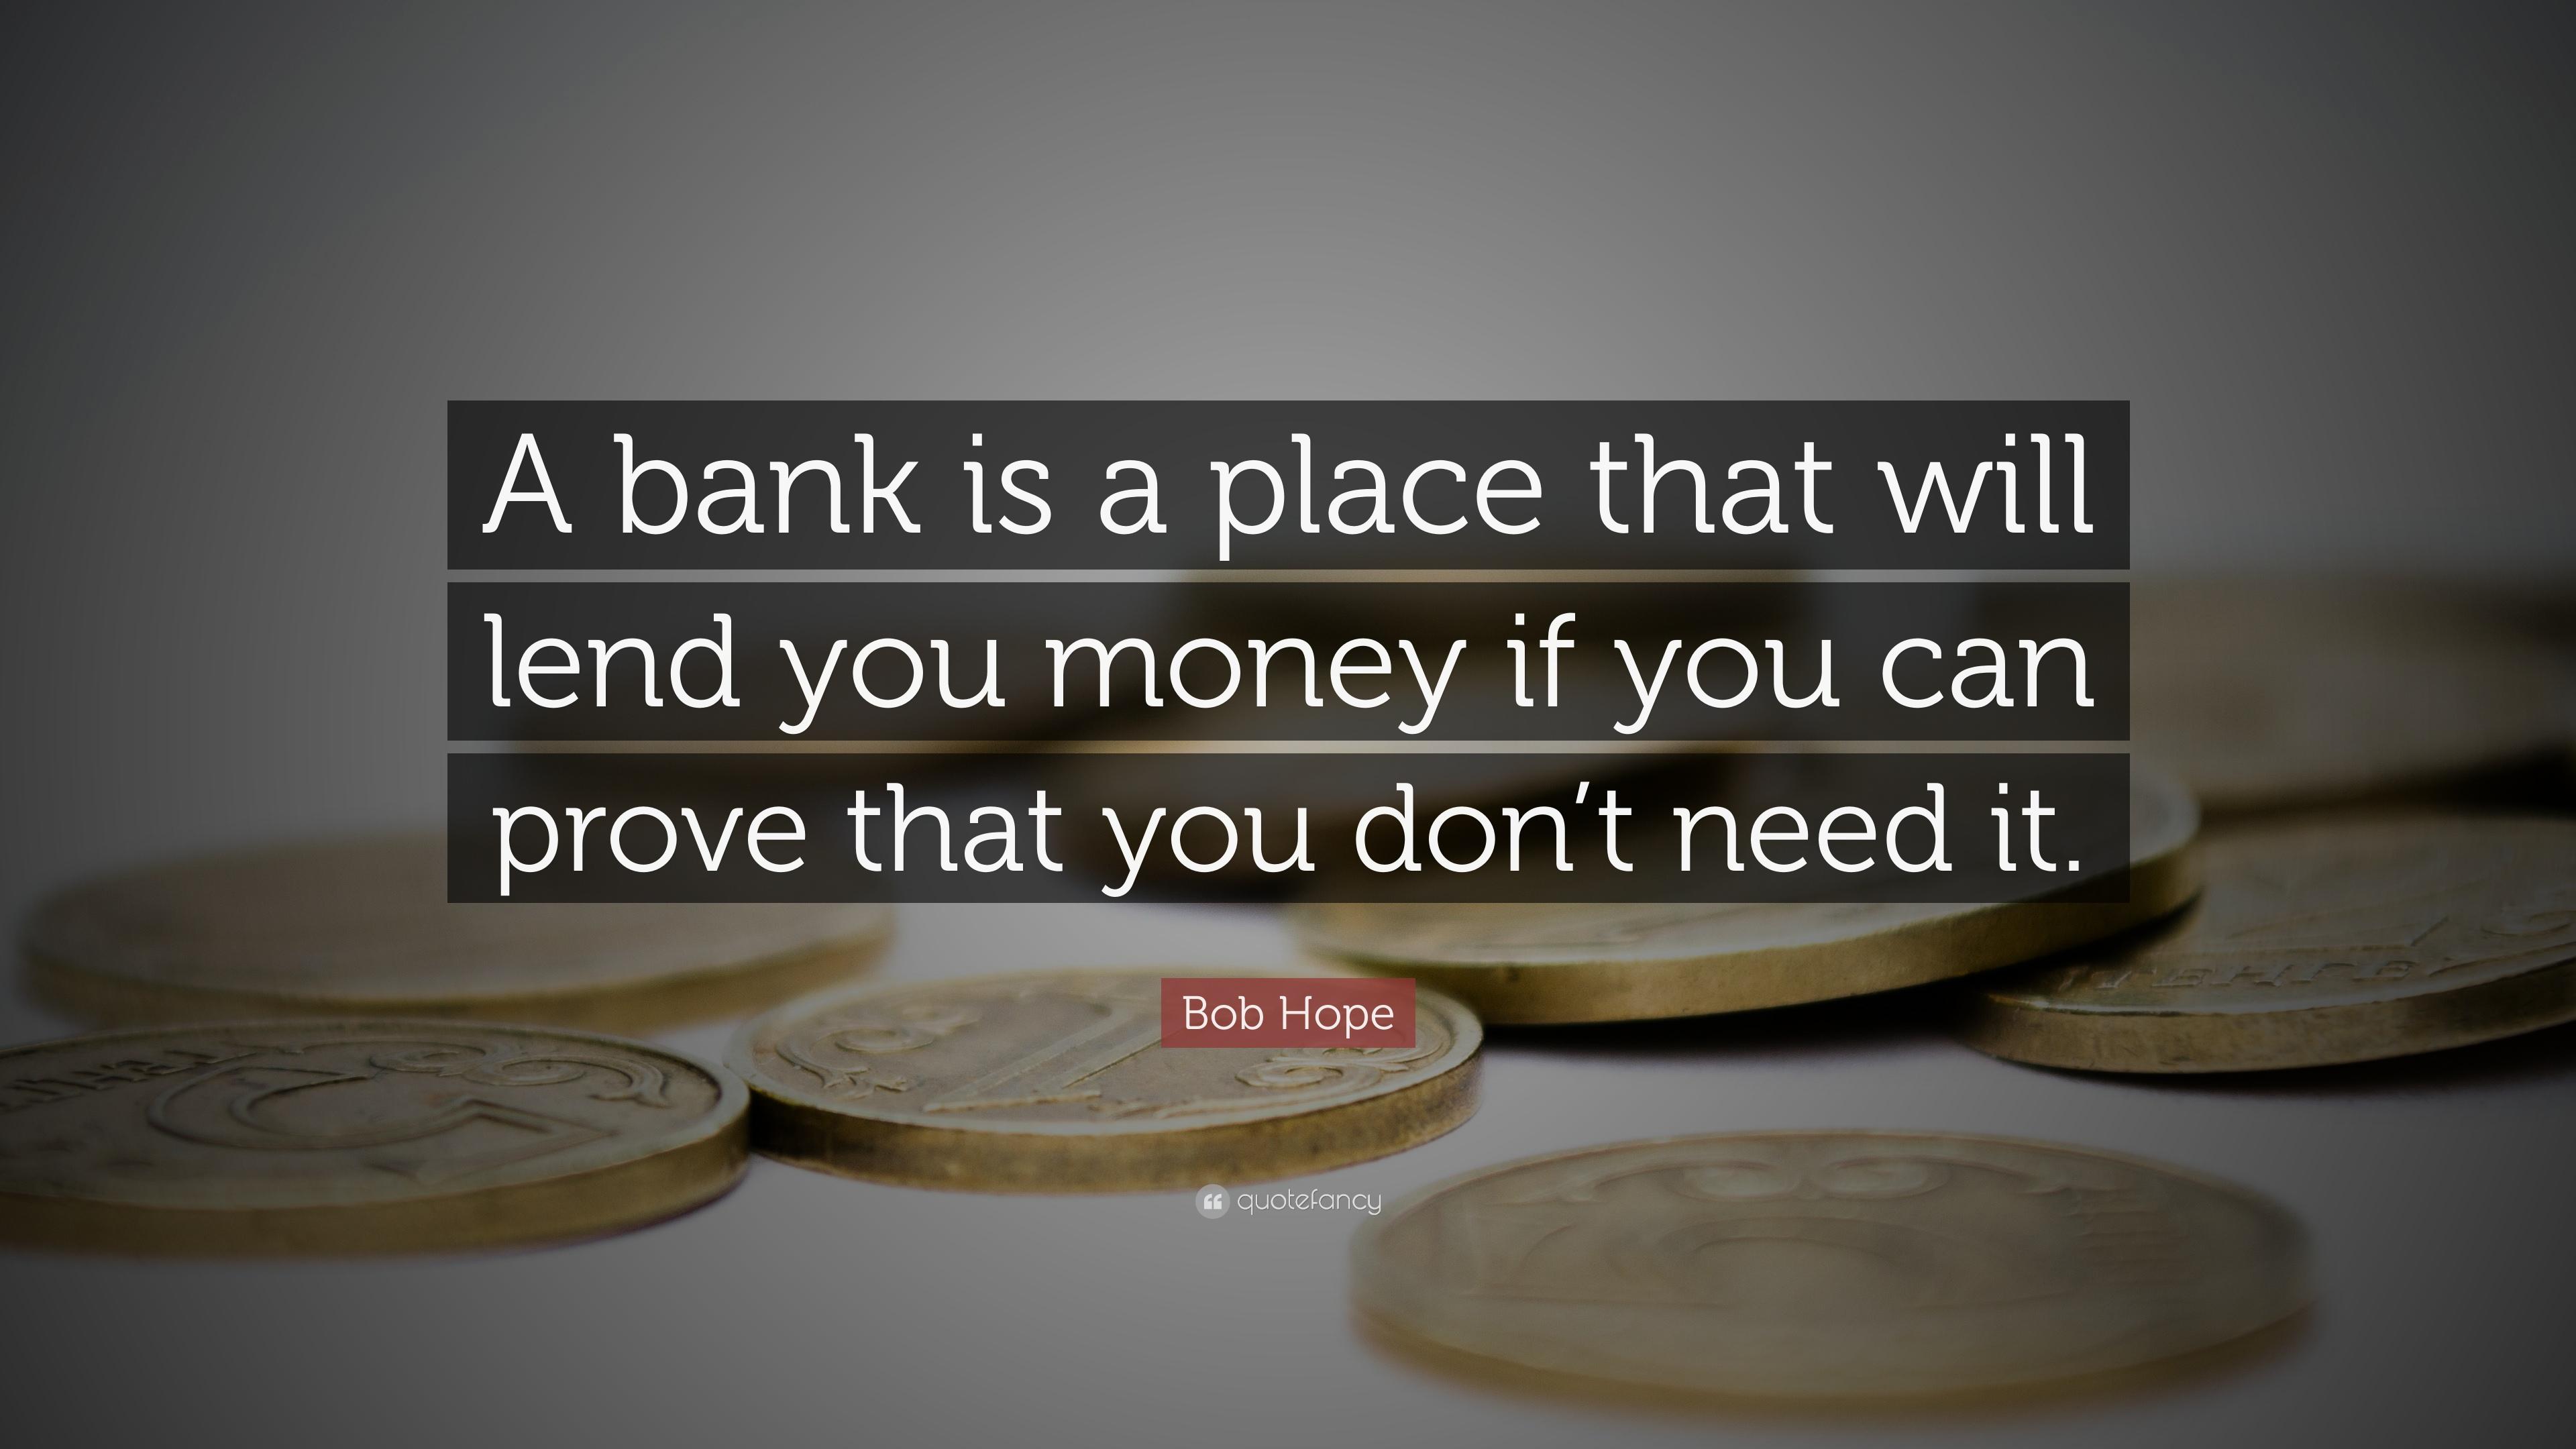 Bob Hope Quote: “A bank is a place that will lend you money if you